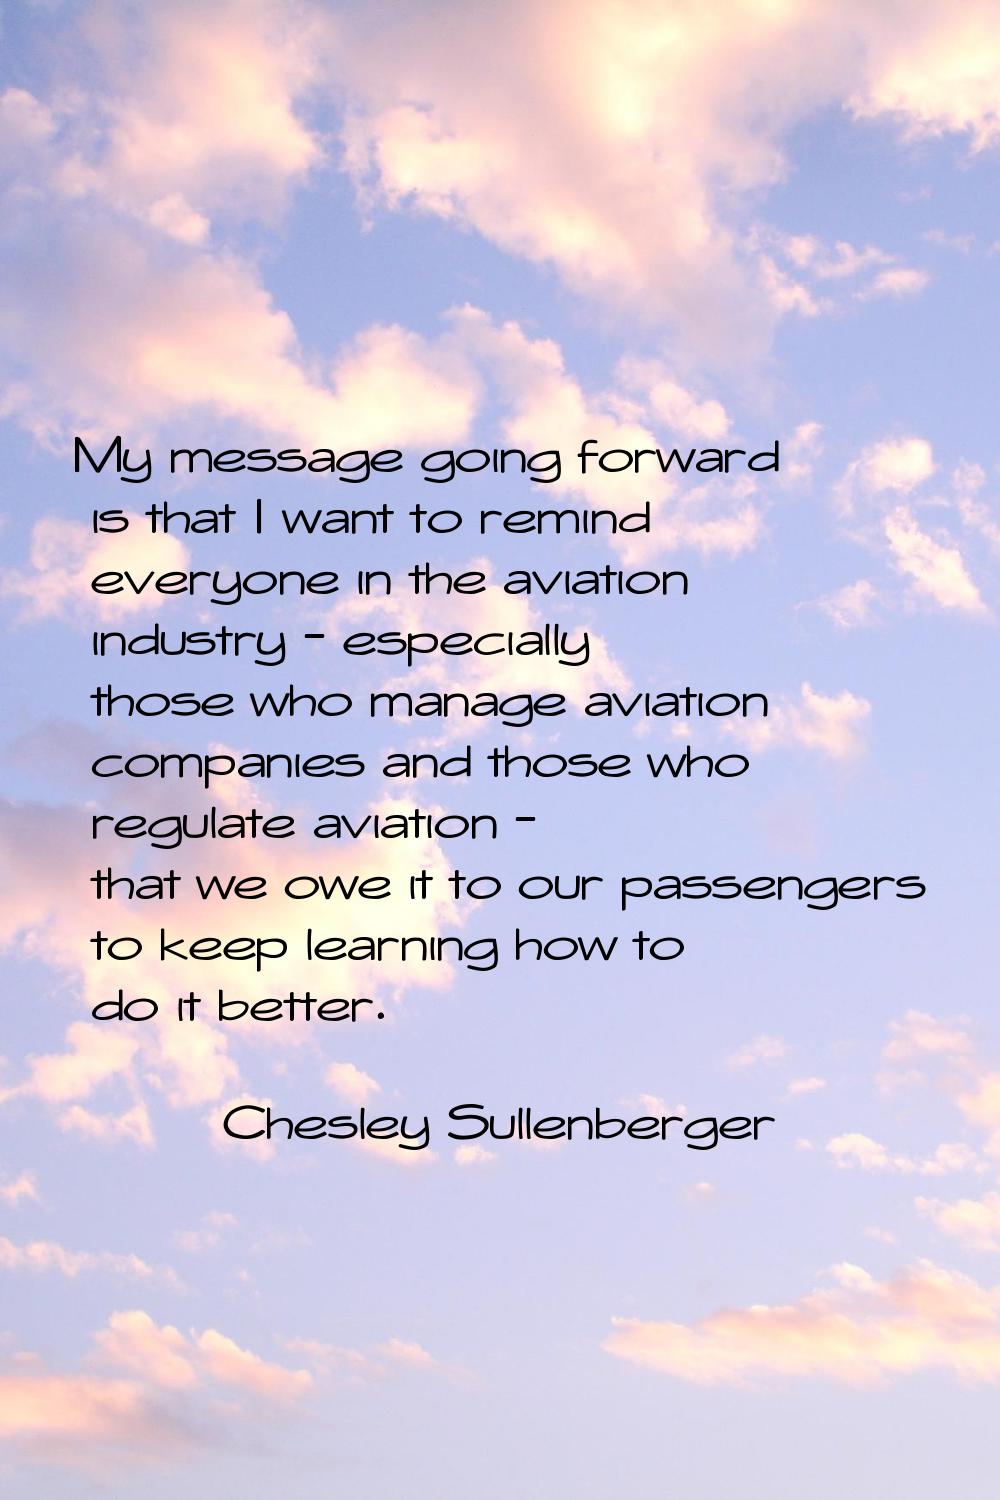 My message going forward is that I want to remind everyone in the aviation industry - especially th